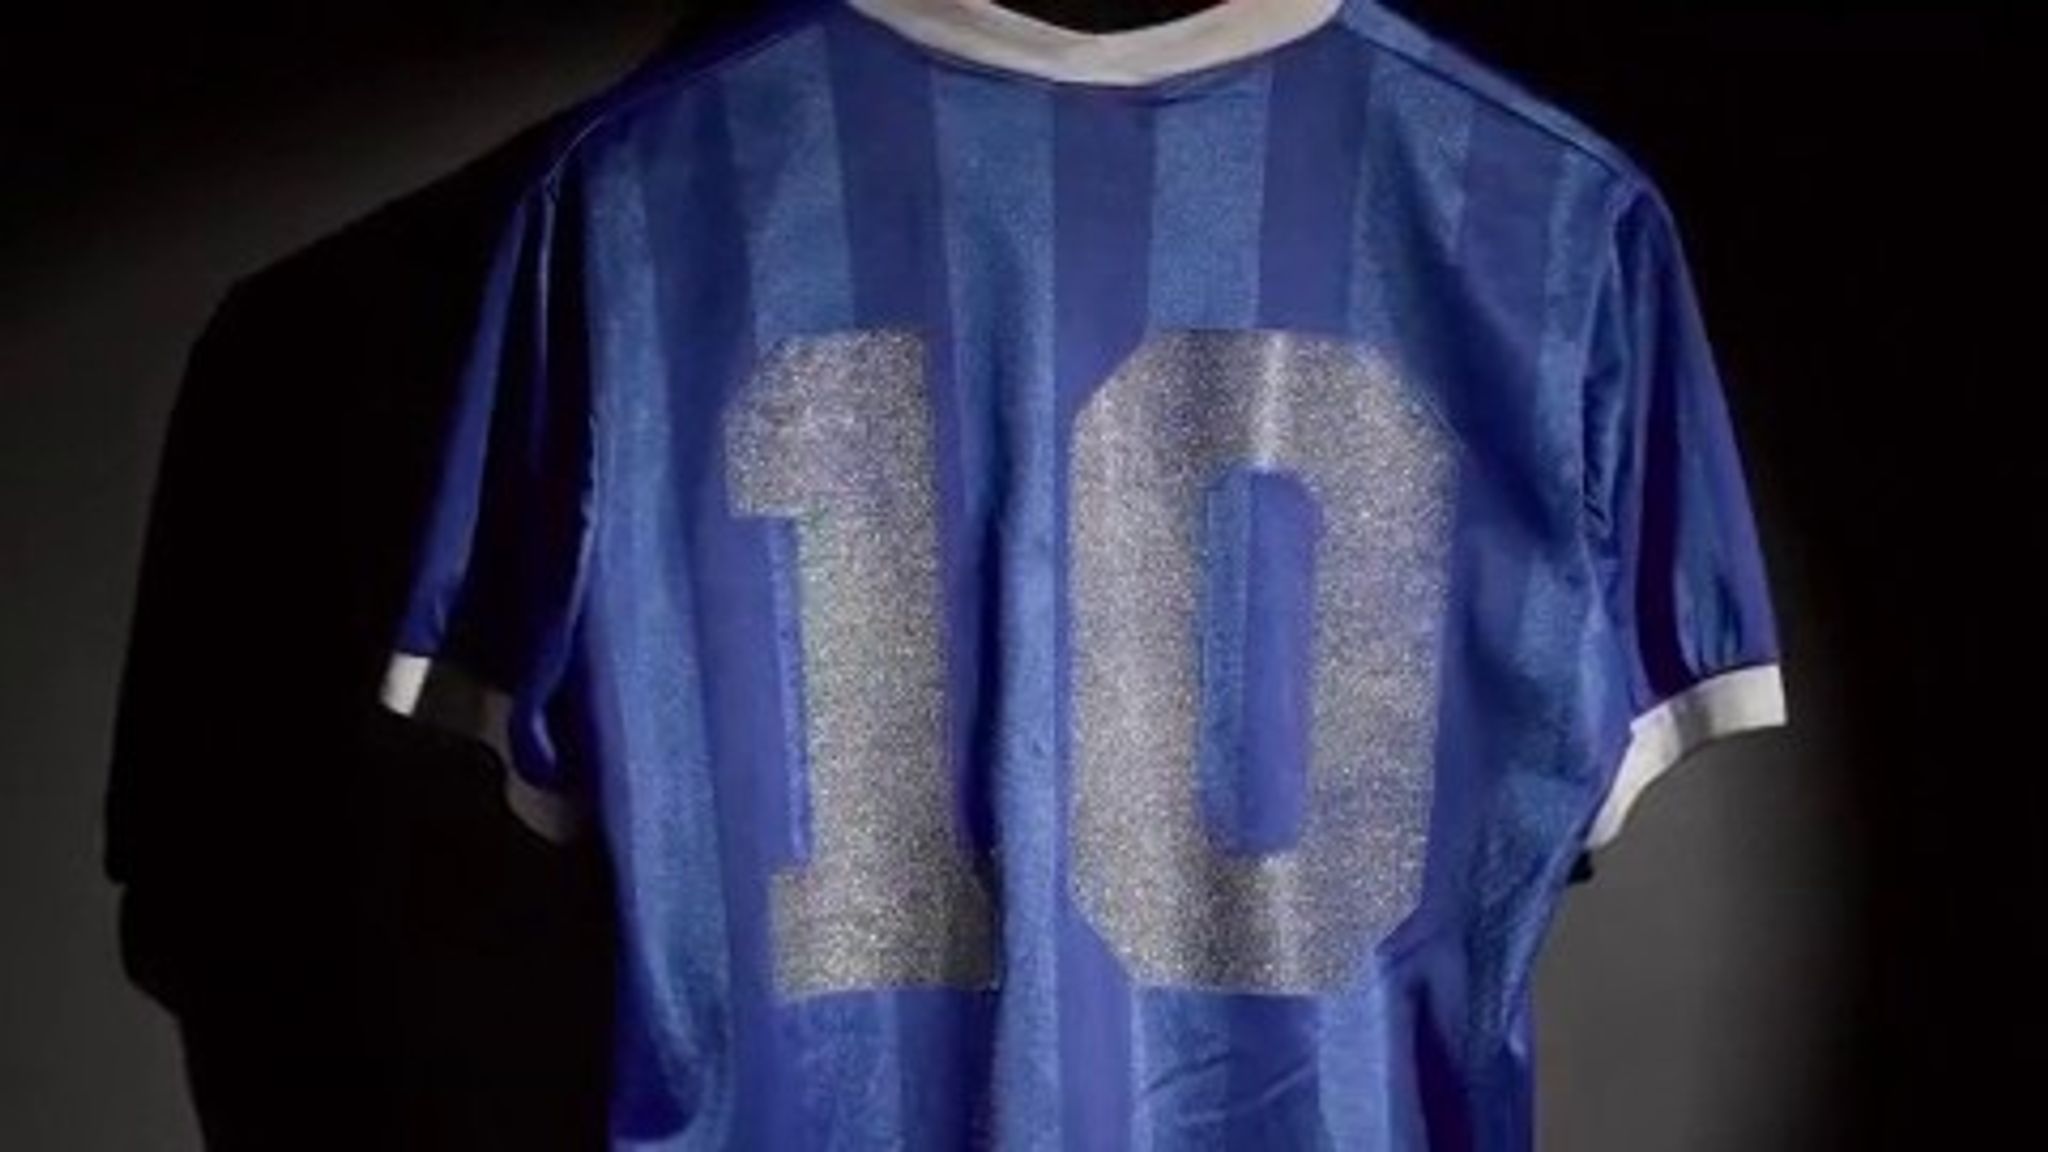 Diego Maradona 'Hand of God' Argentina shirt sells for record-breaking sum  at auction